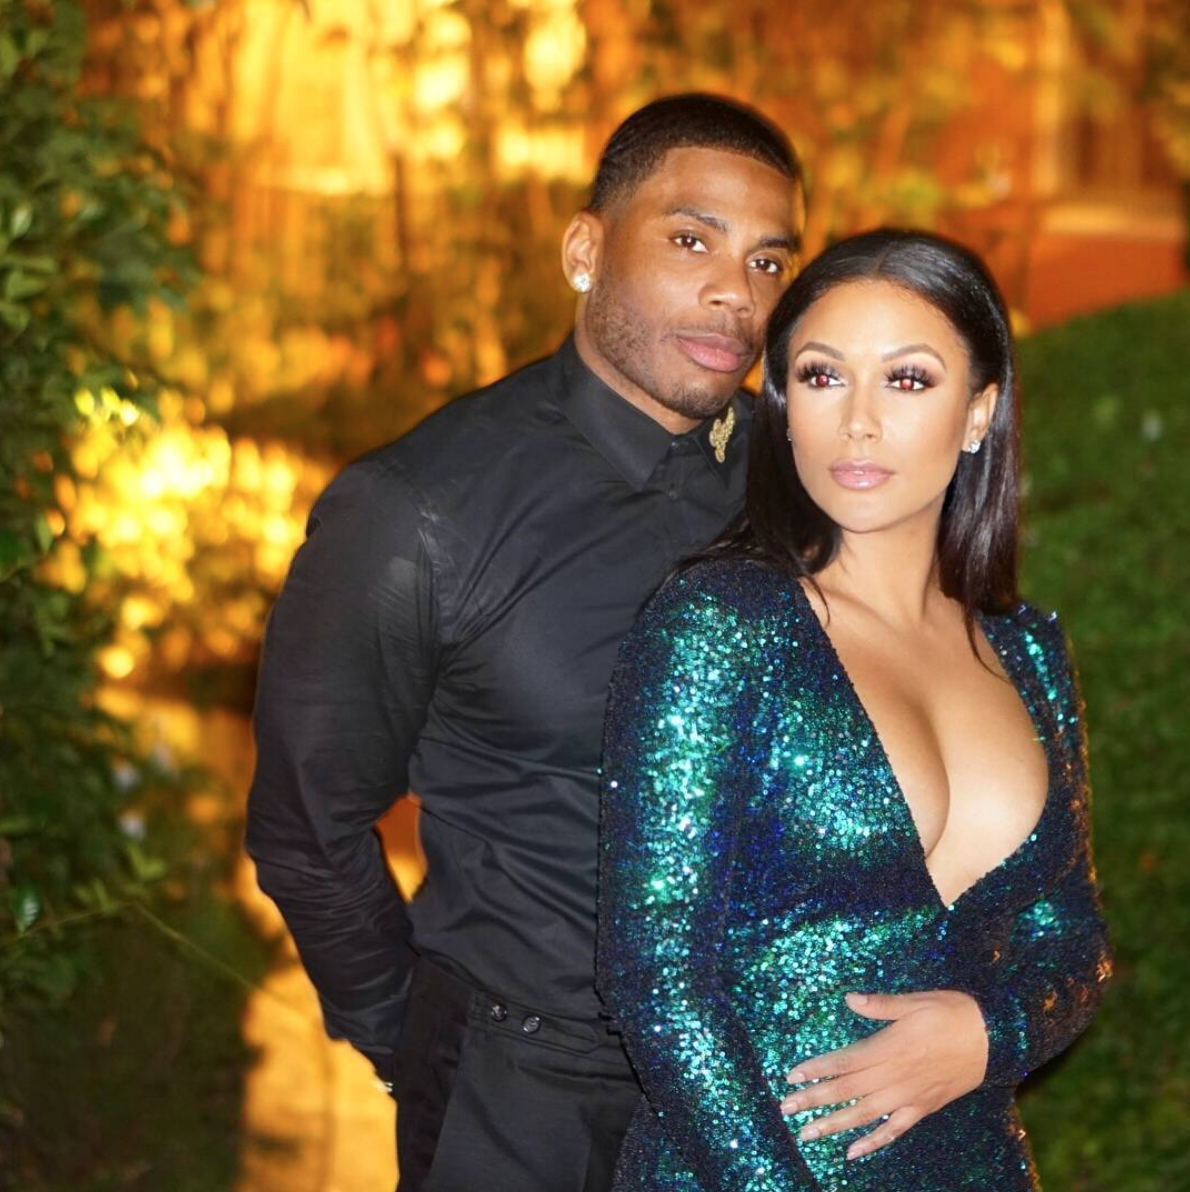 Nelly and His Girlfriend Lip Sync ‘Dilemma’ and the Moment Is Super Sweet